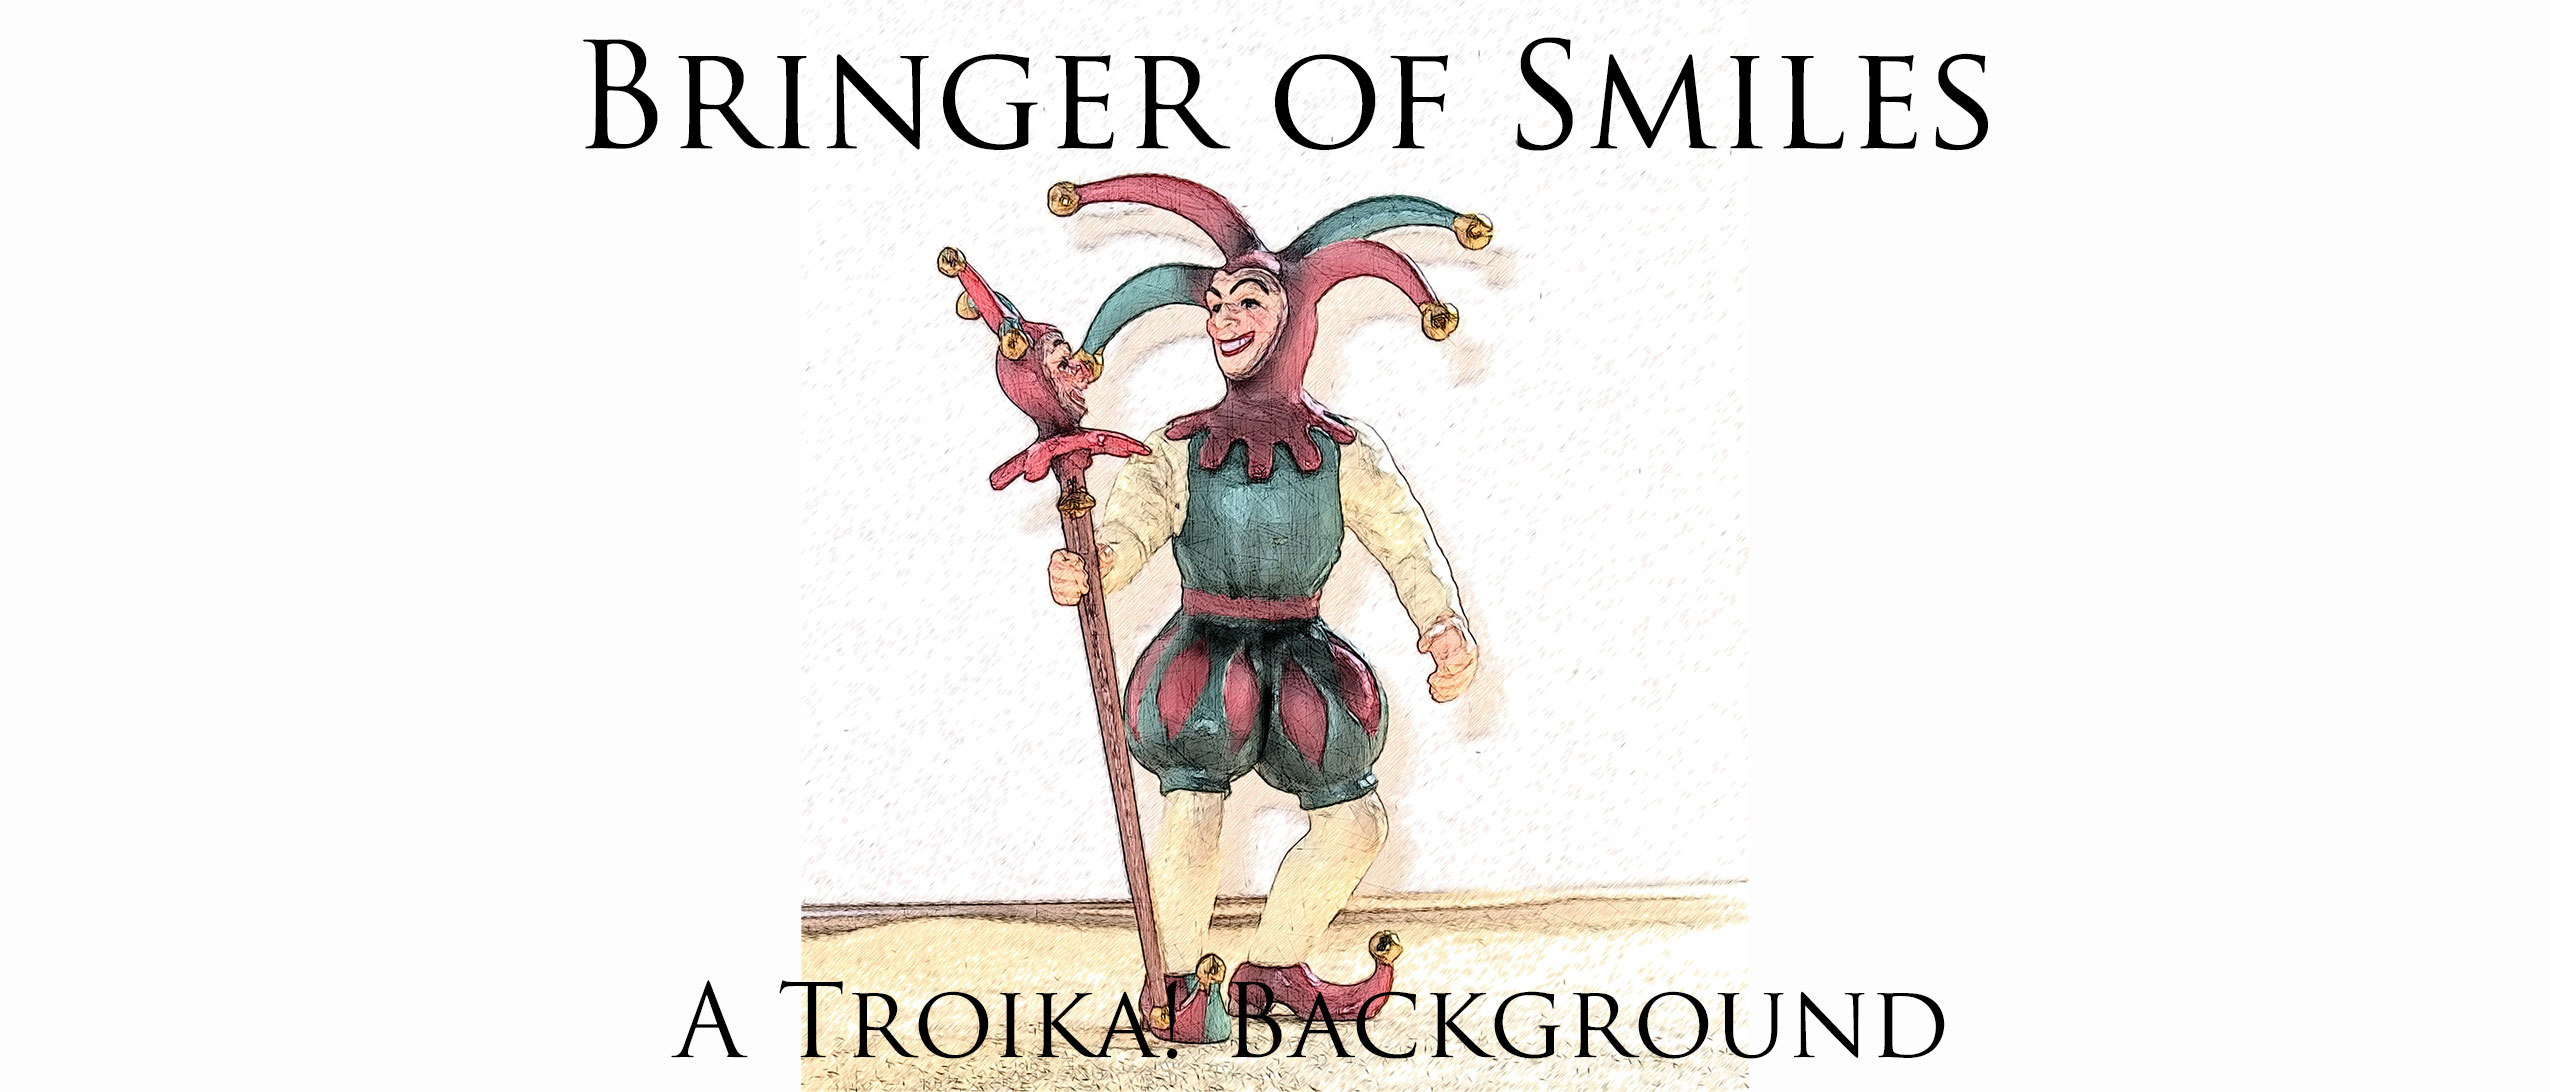 Bringer of Smiles - A Troika! Background